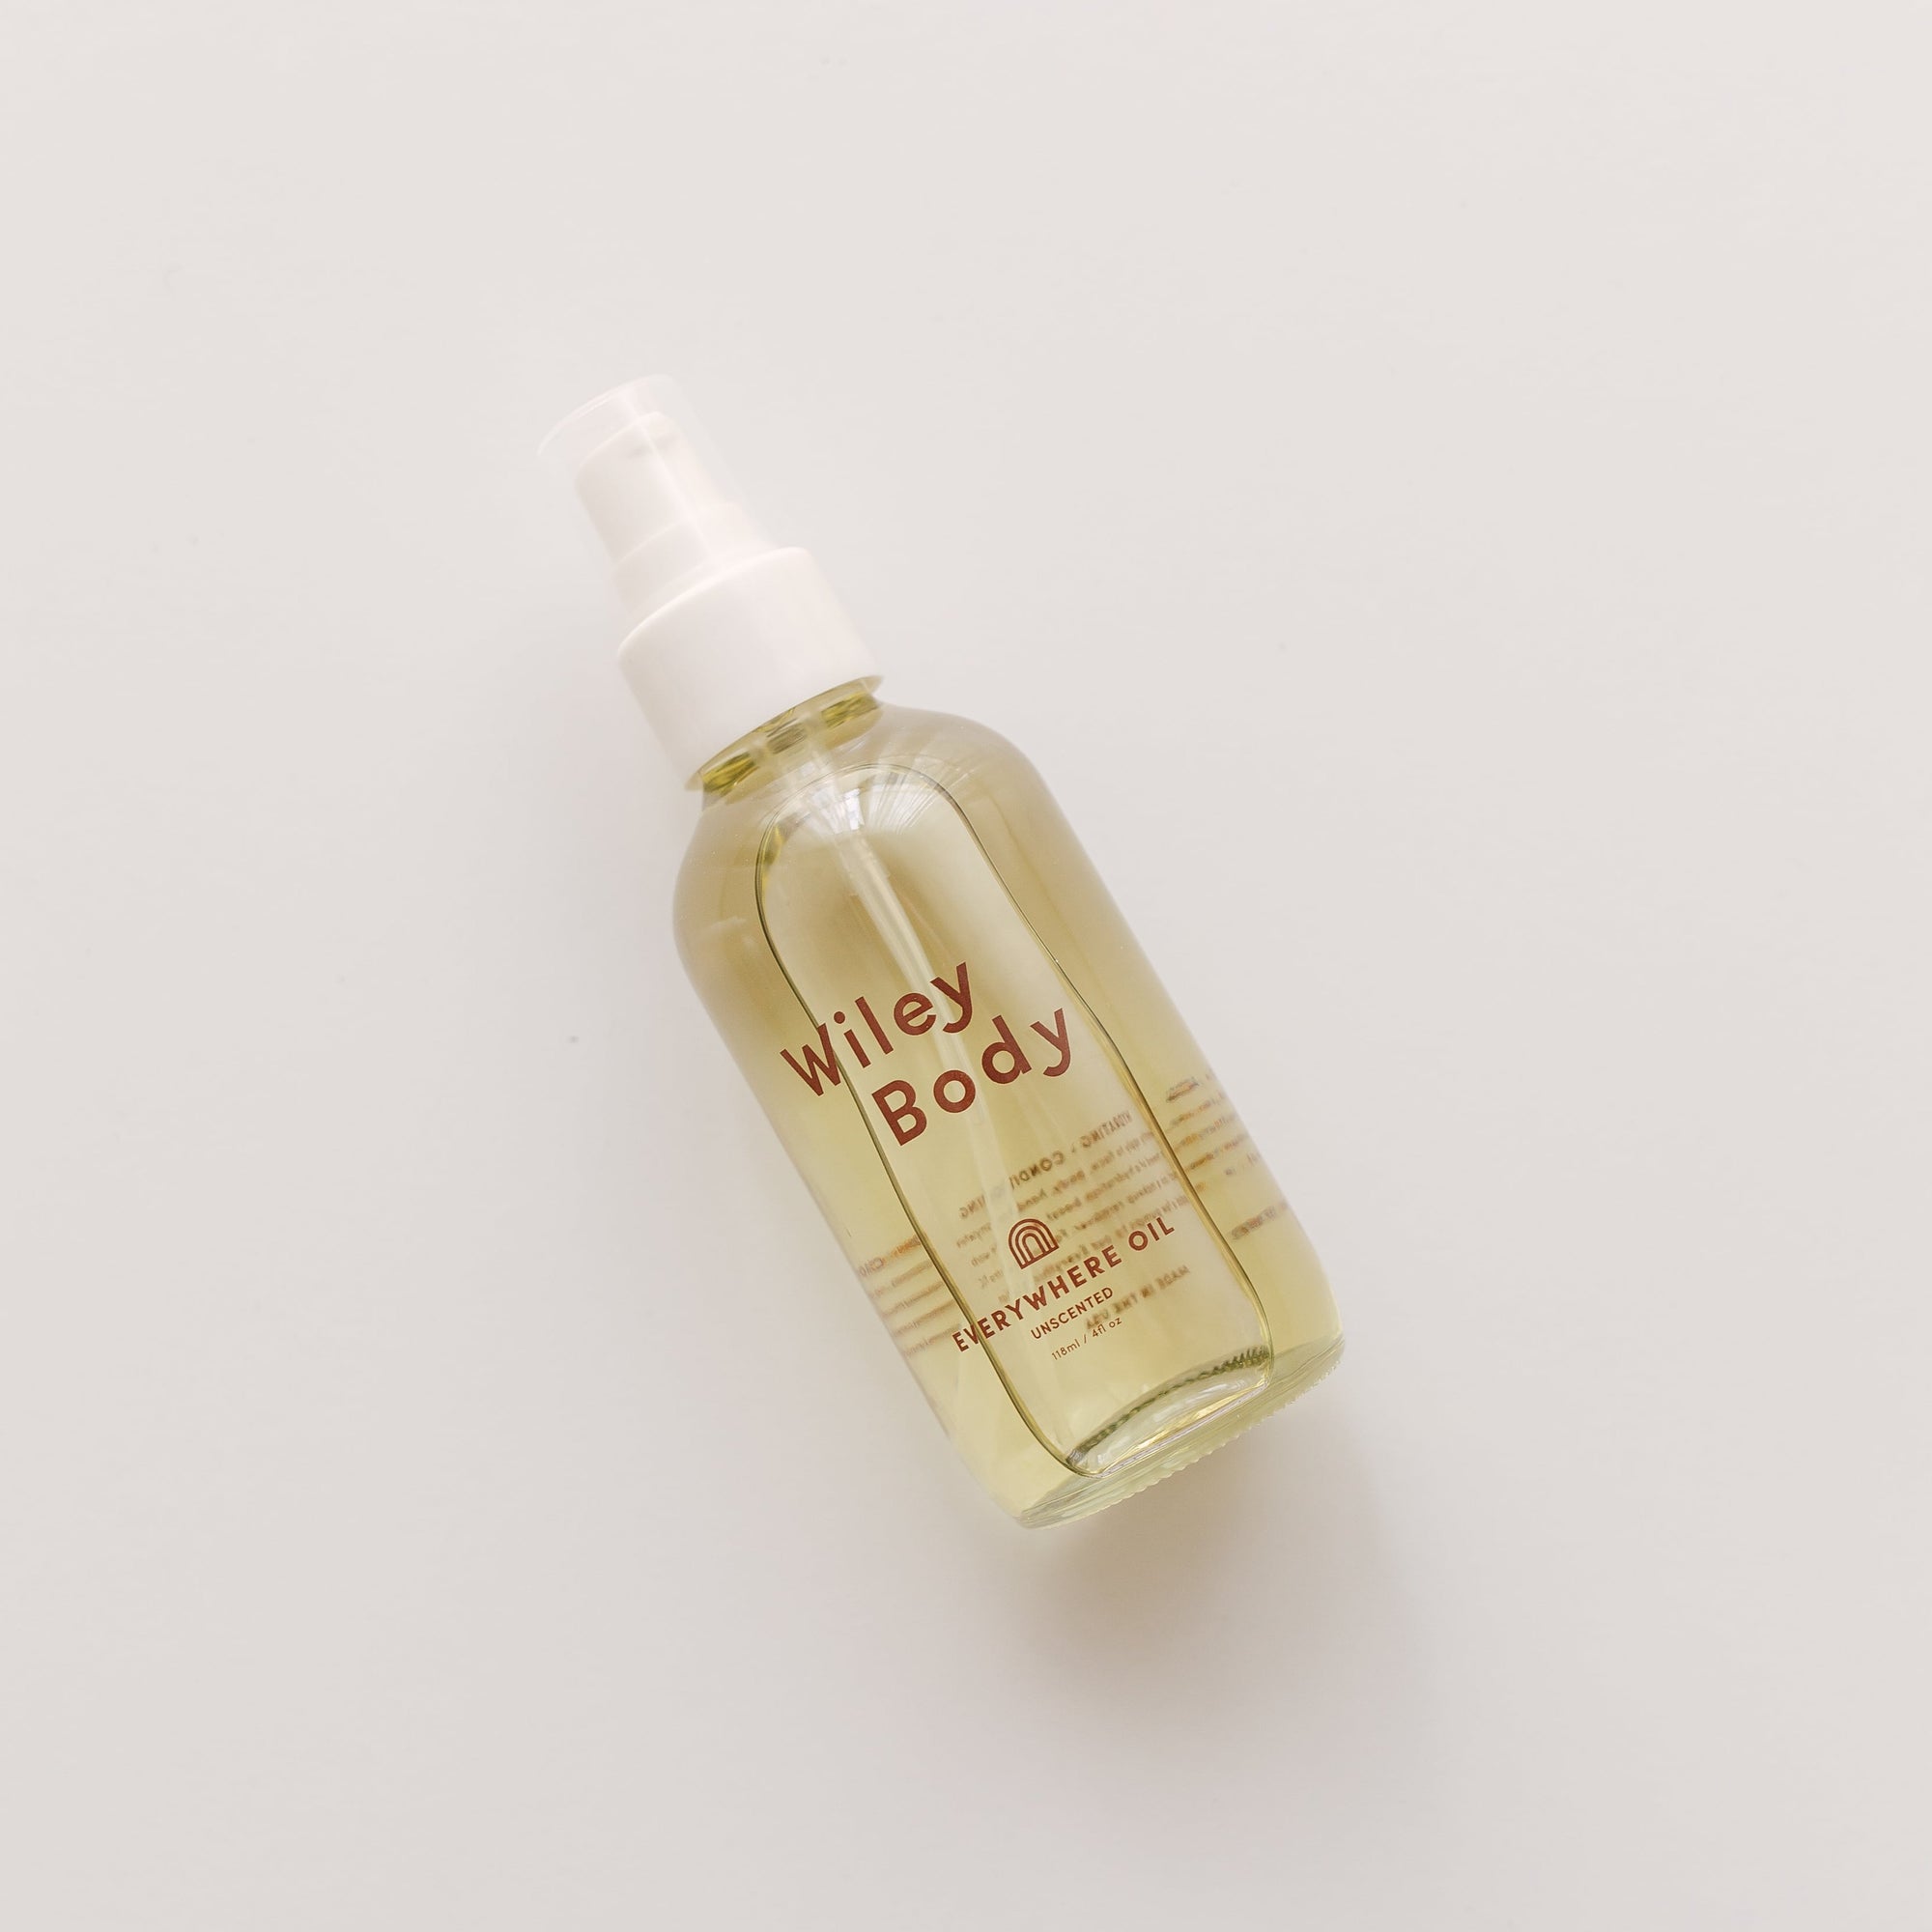 A nourishing bottle of Wiley Body everywhere oil on a white surface.